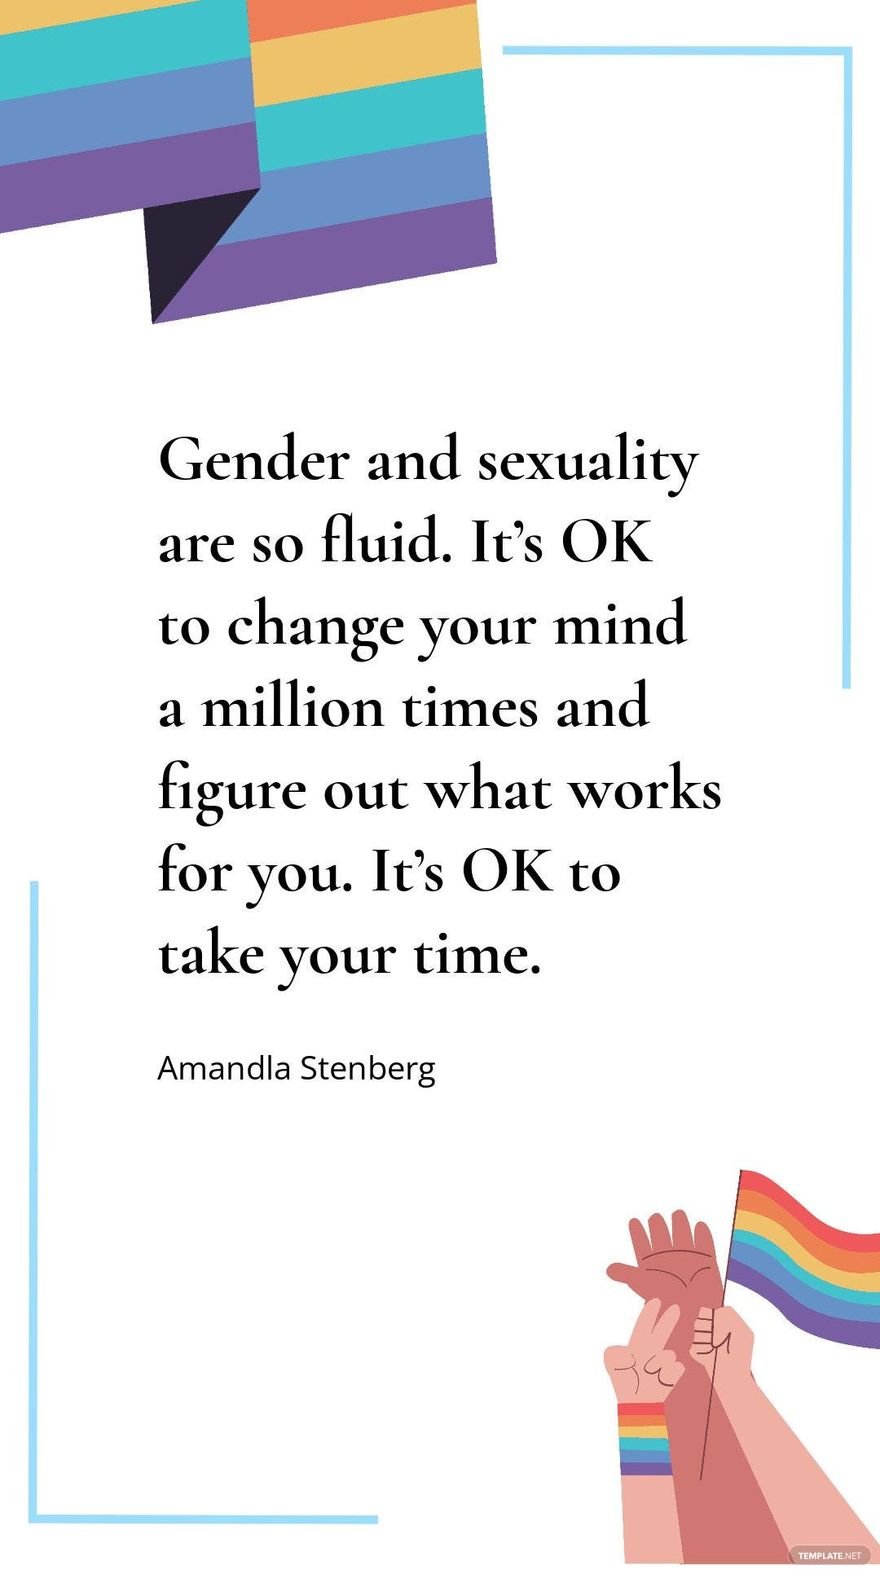 Amandla Stenberg - Gender and sexuality are so fluid. It’s OK to change your mind a million times and figure out what works for you. It’s OK to take your time. Template